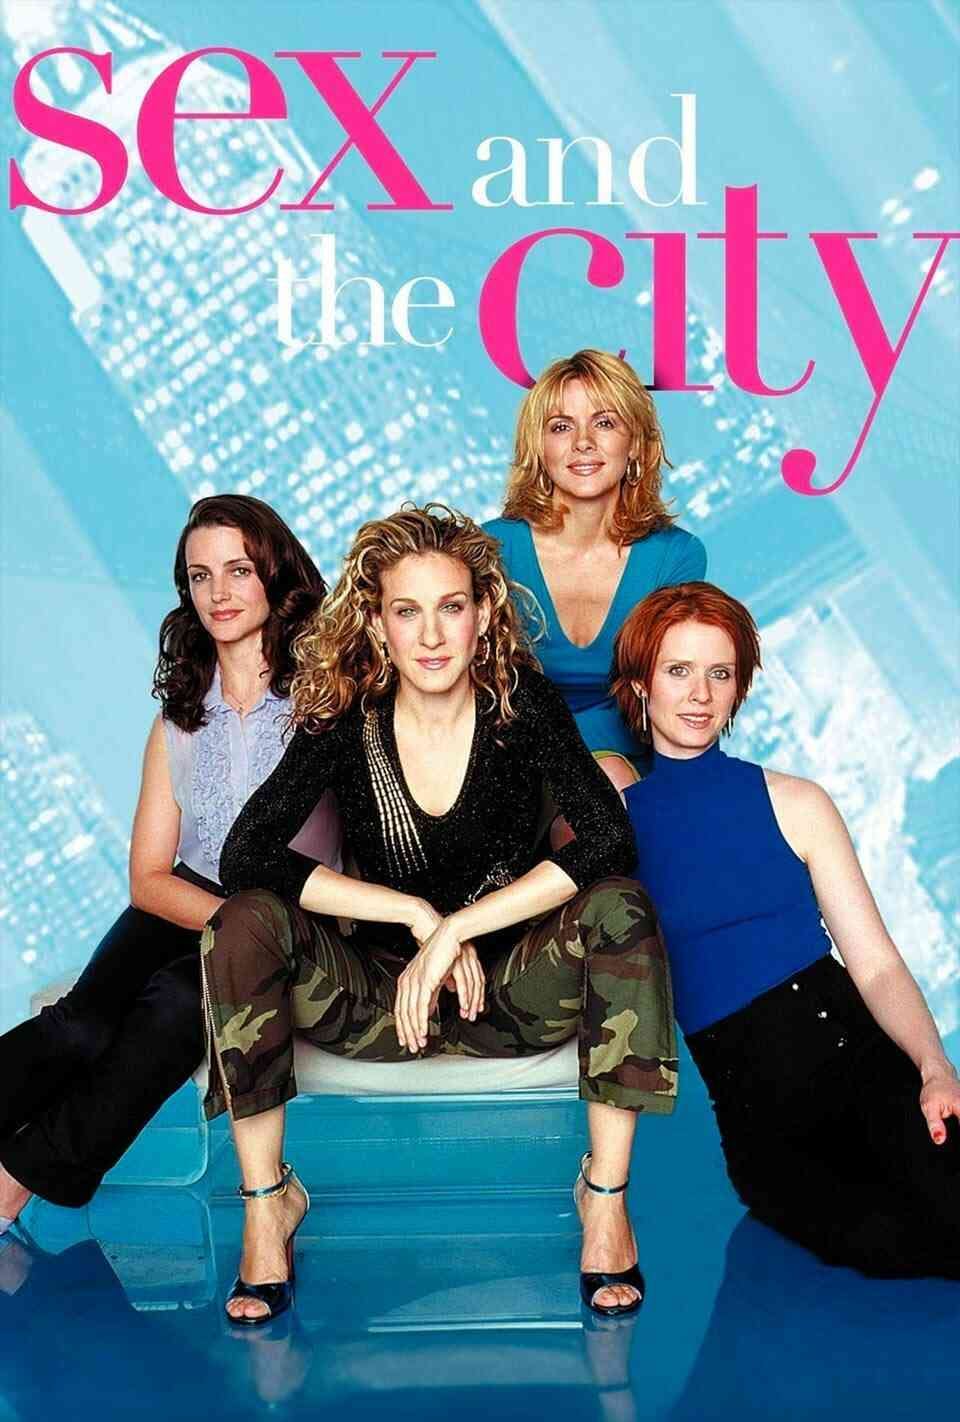 Read Sex and the City screenplay (poster)